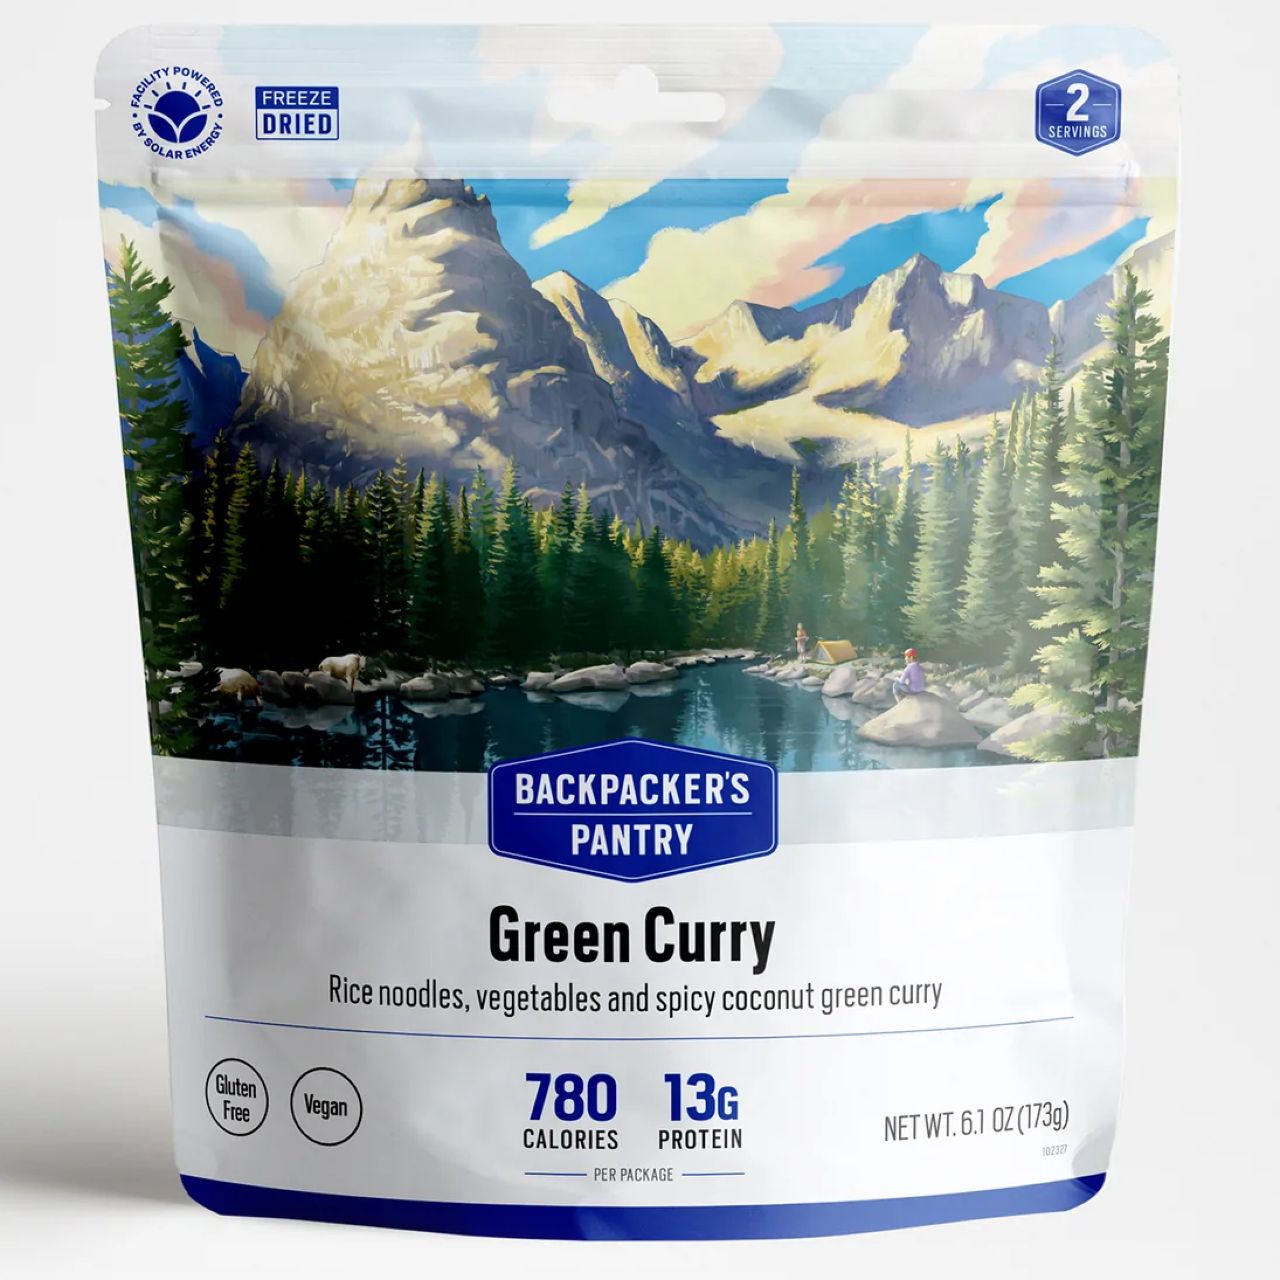 Backpacker's Pantry Green Curry